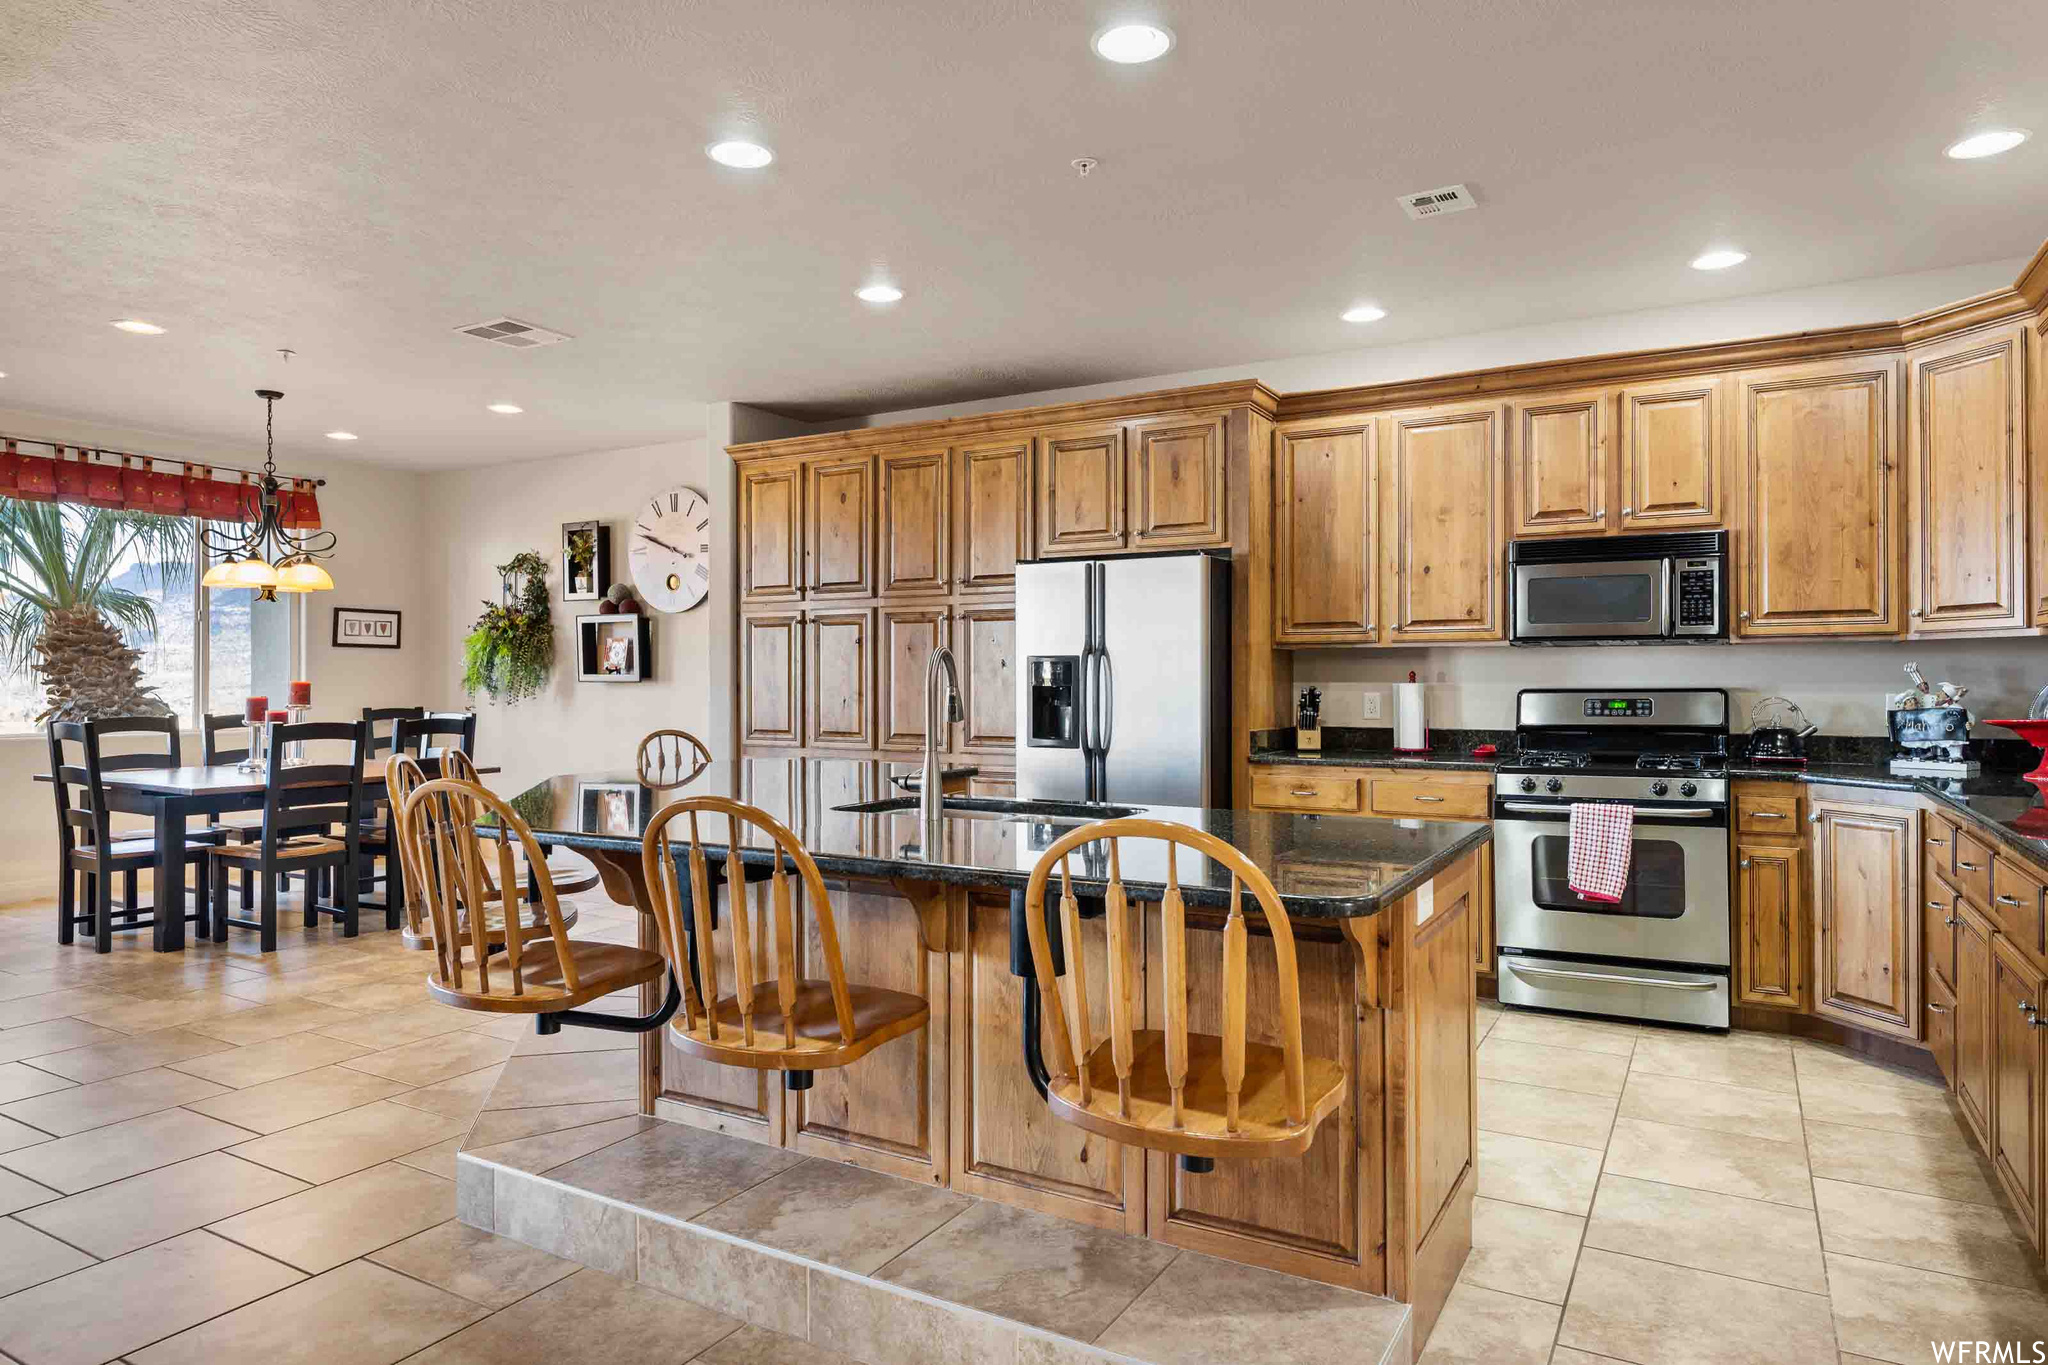 Kitchen featuring a chandelier, a center island with sink, hanging light fixtures, and stainless steel appliances